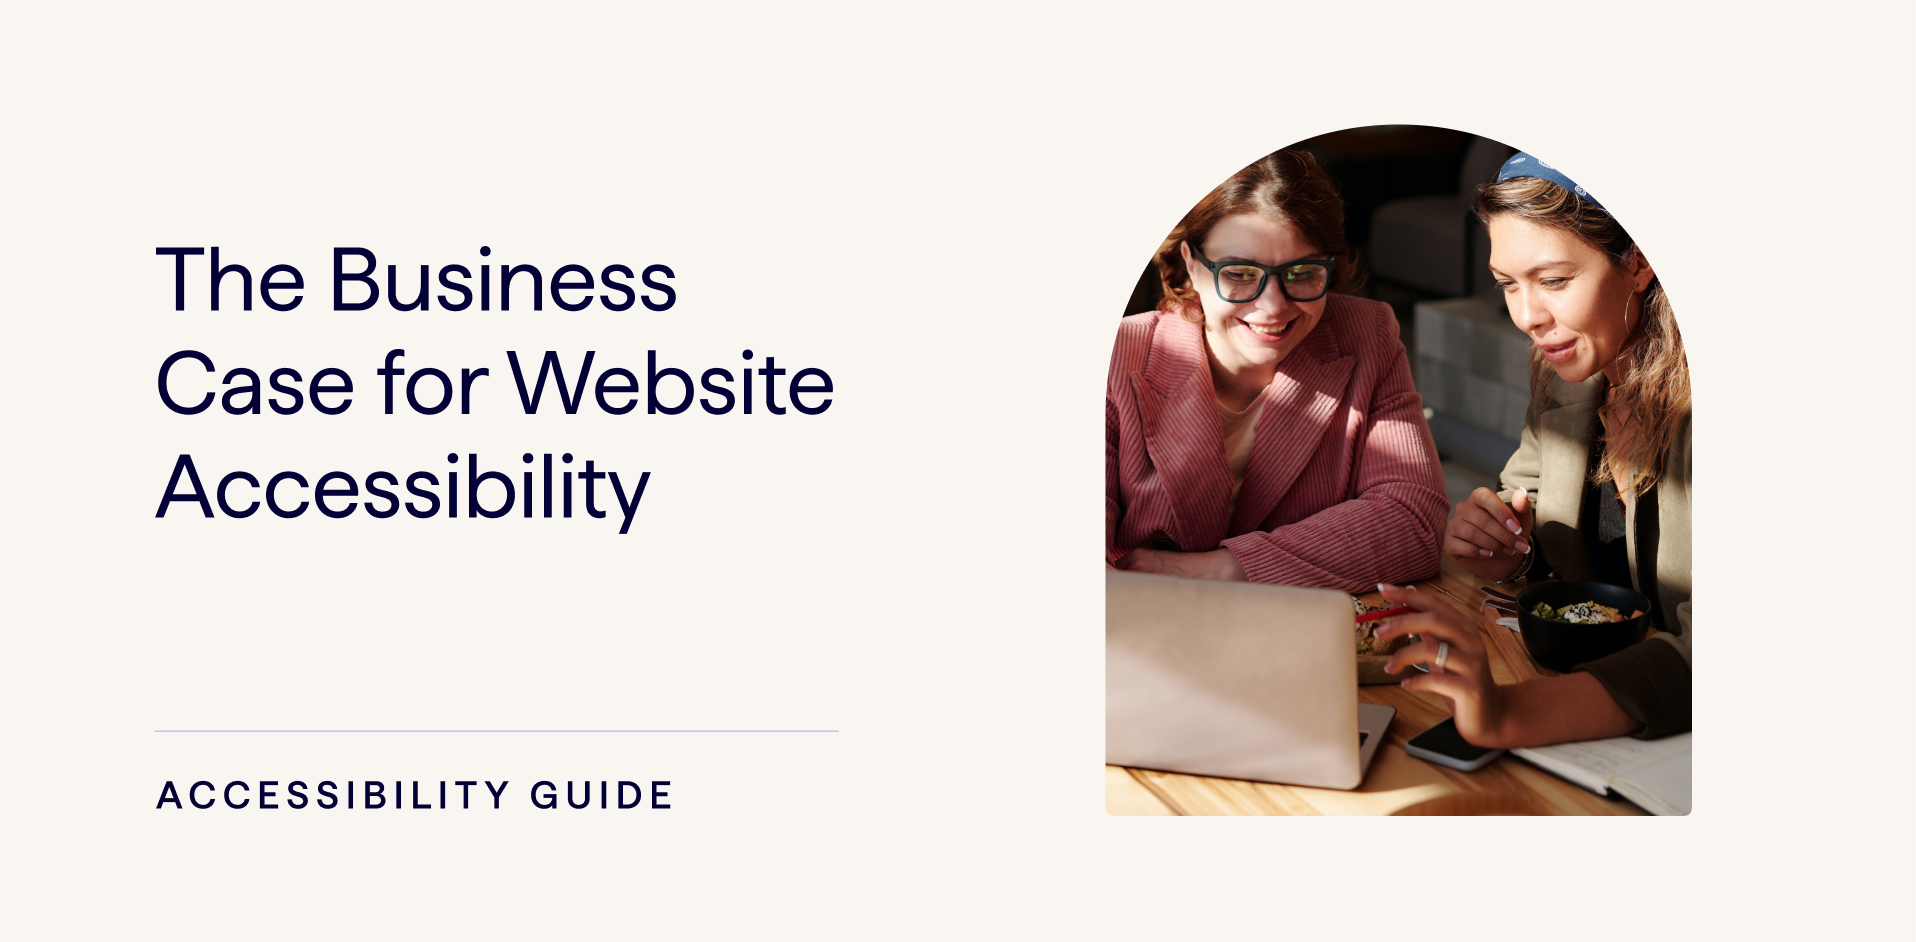 The Business Case for Website Accessibility